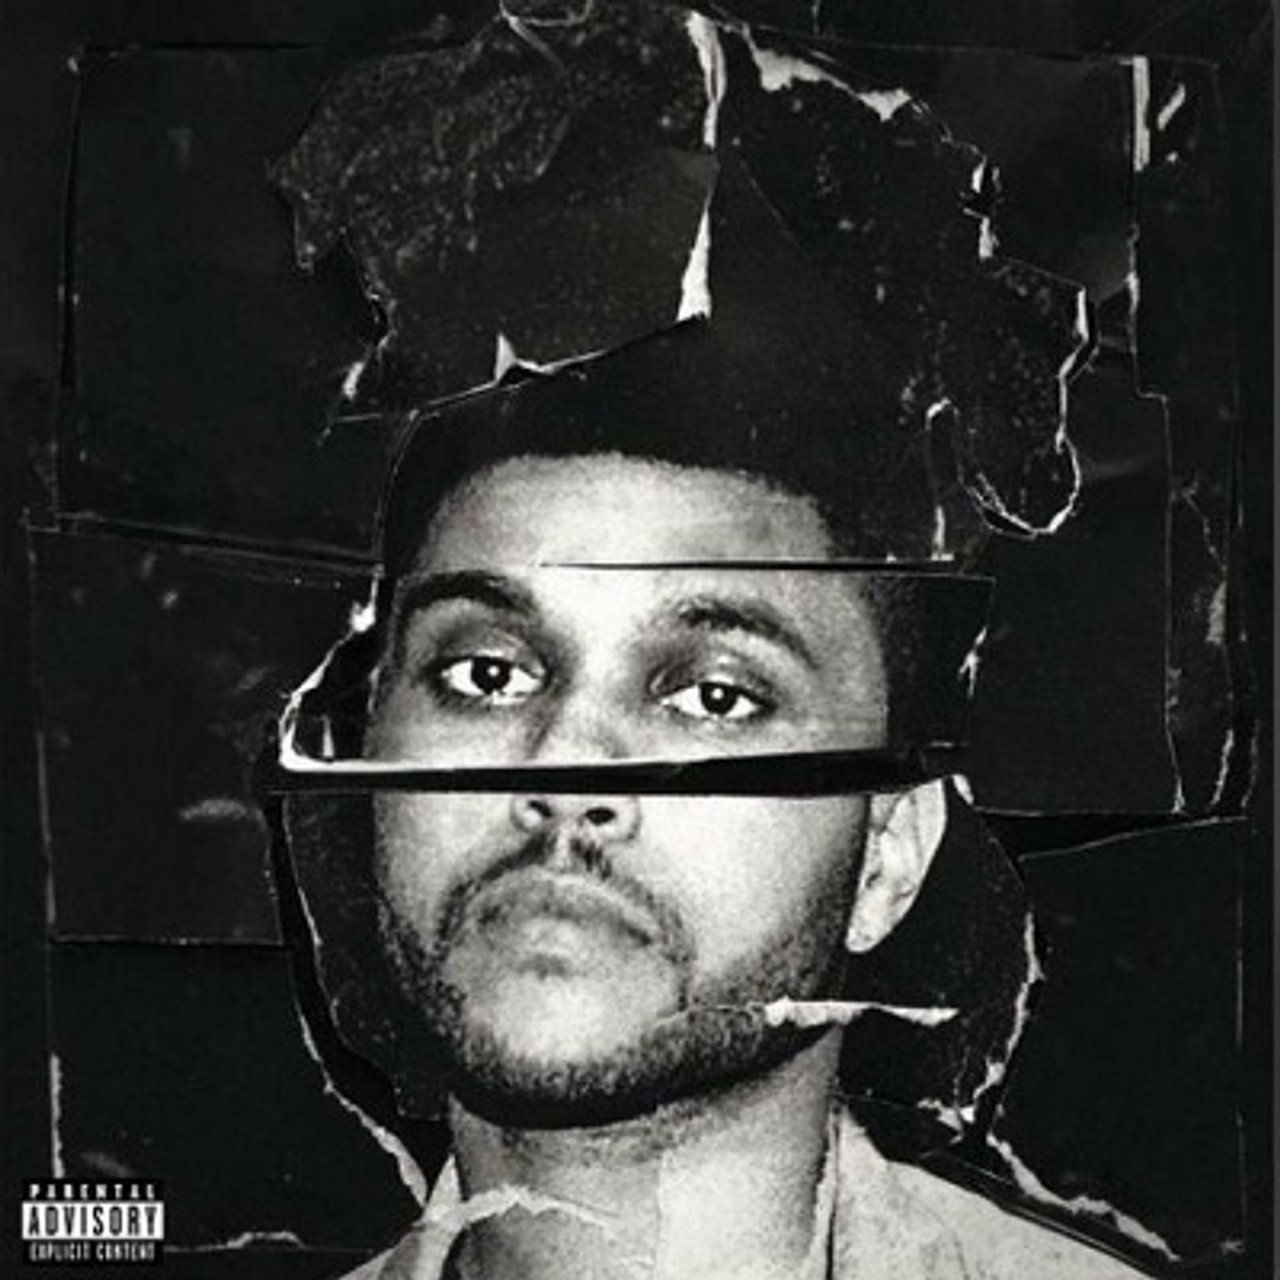 The Weeknd Beauty Behind the Madness CD